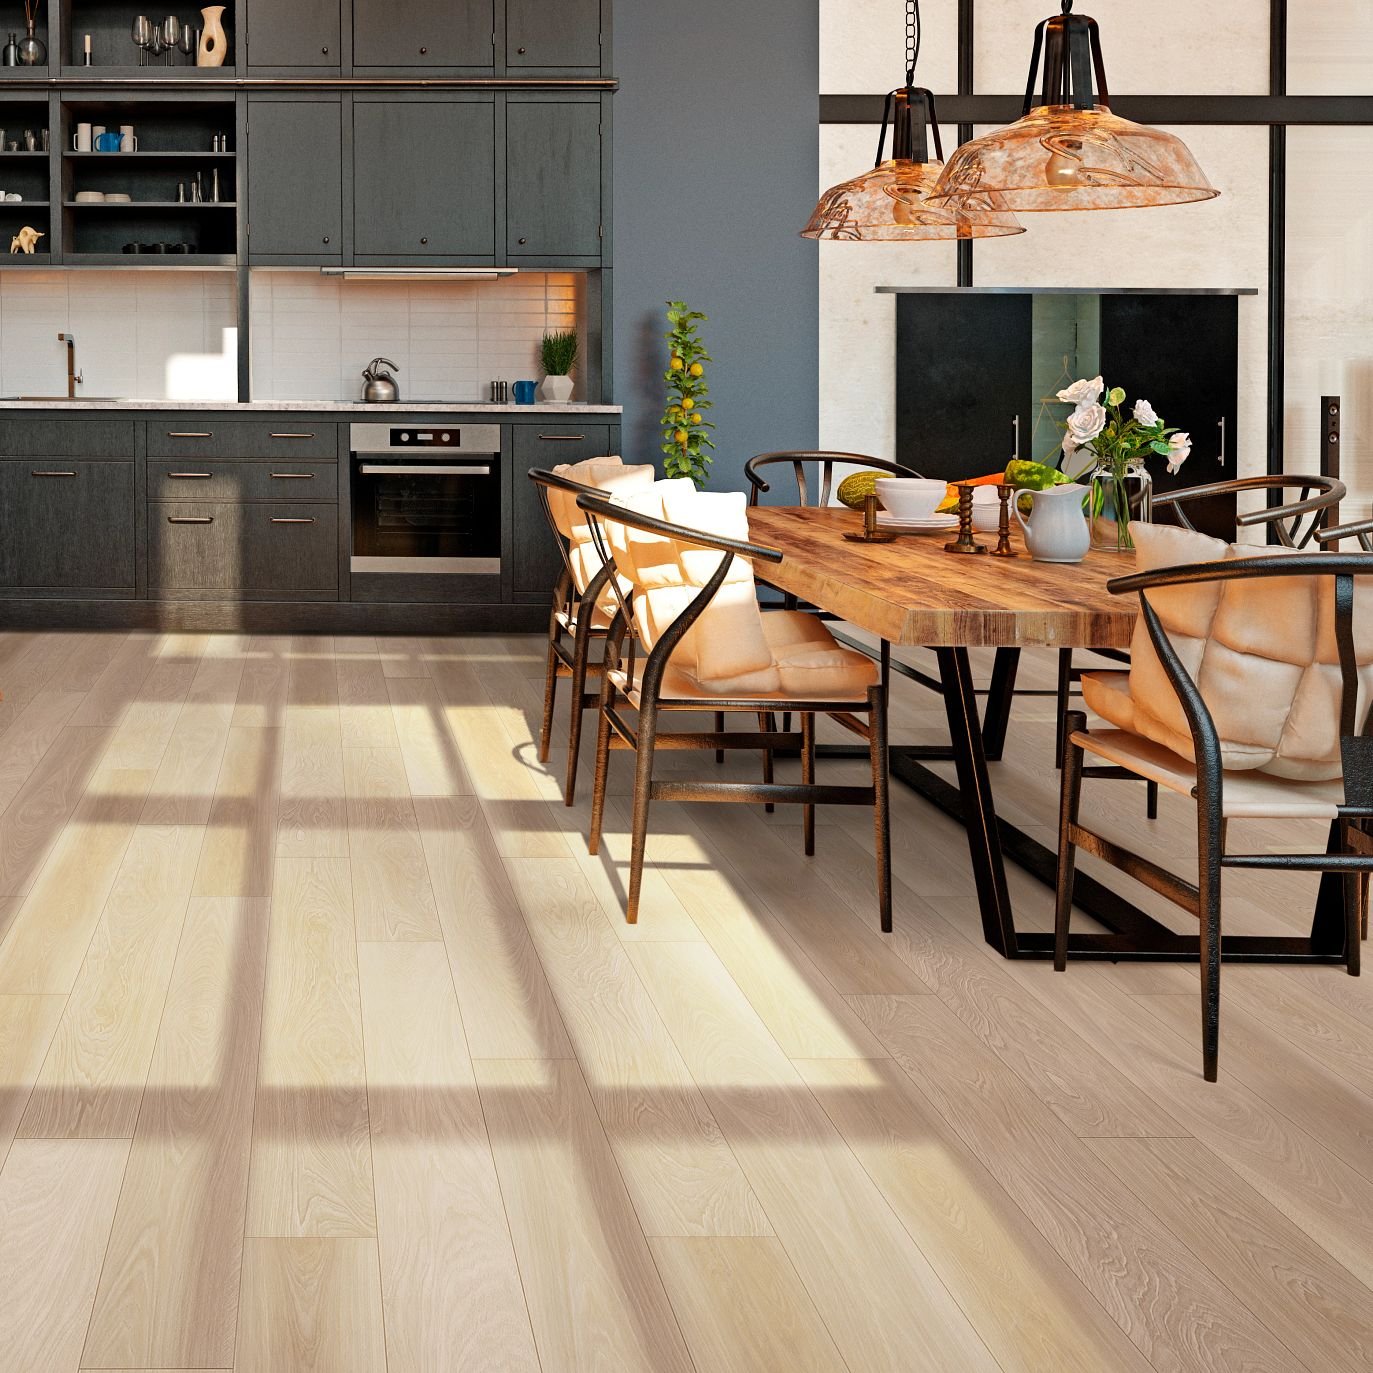 Modern Kitchen from Green Carpet Co. - The Flooring Connection in San Antonio